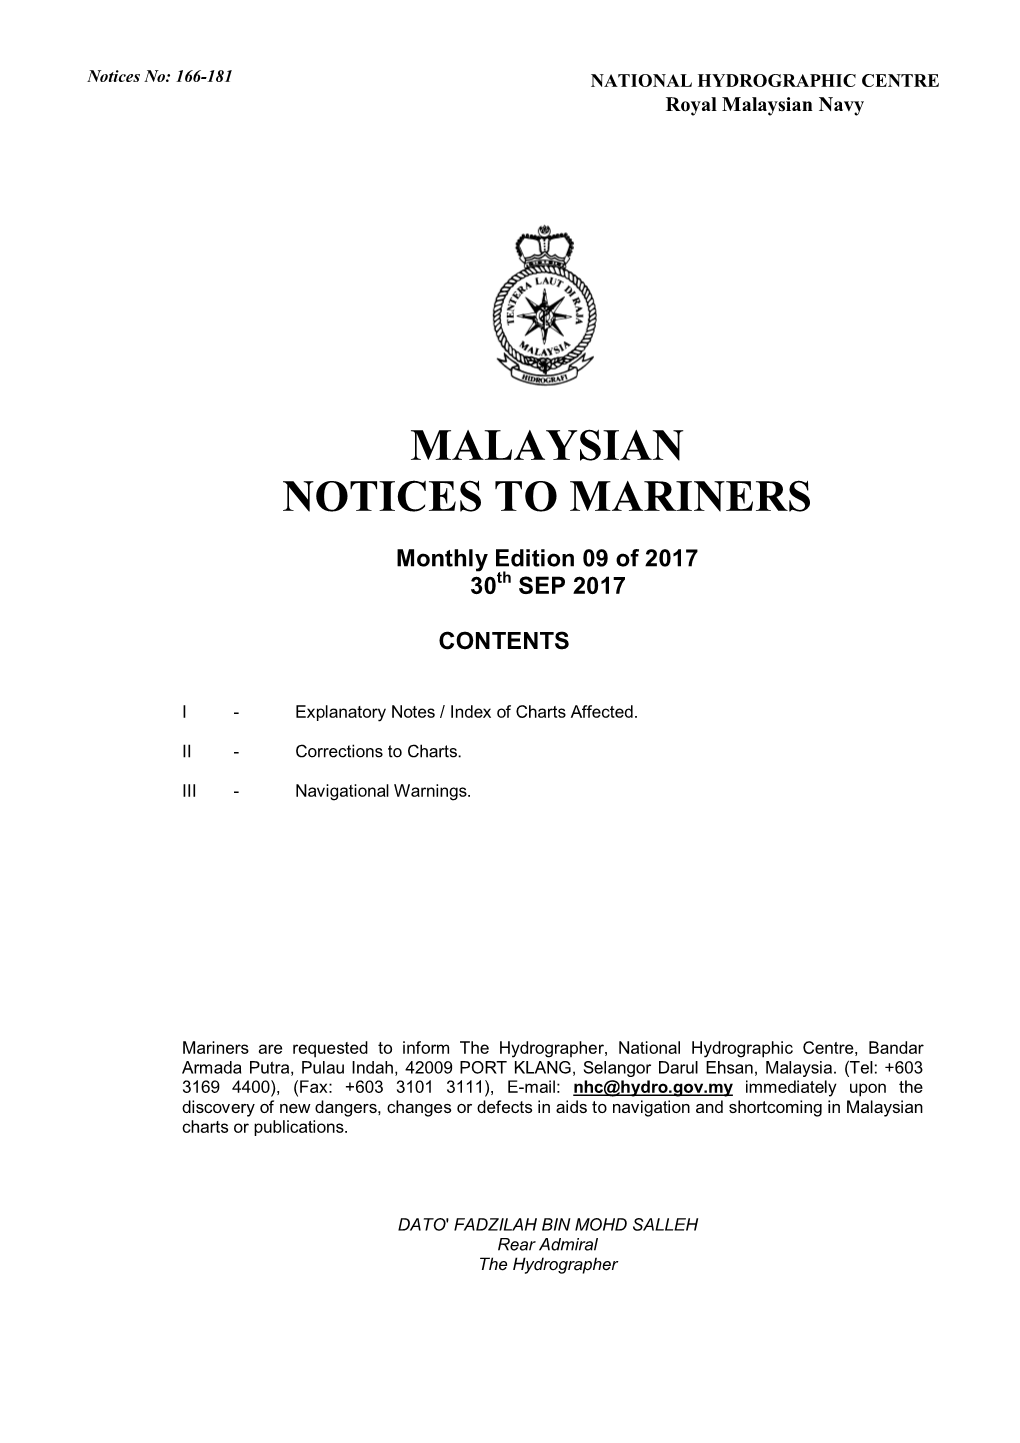 Malaysian Notices to Mariners